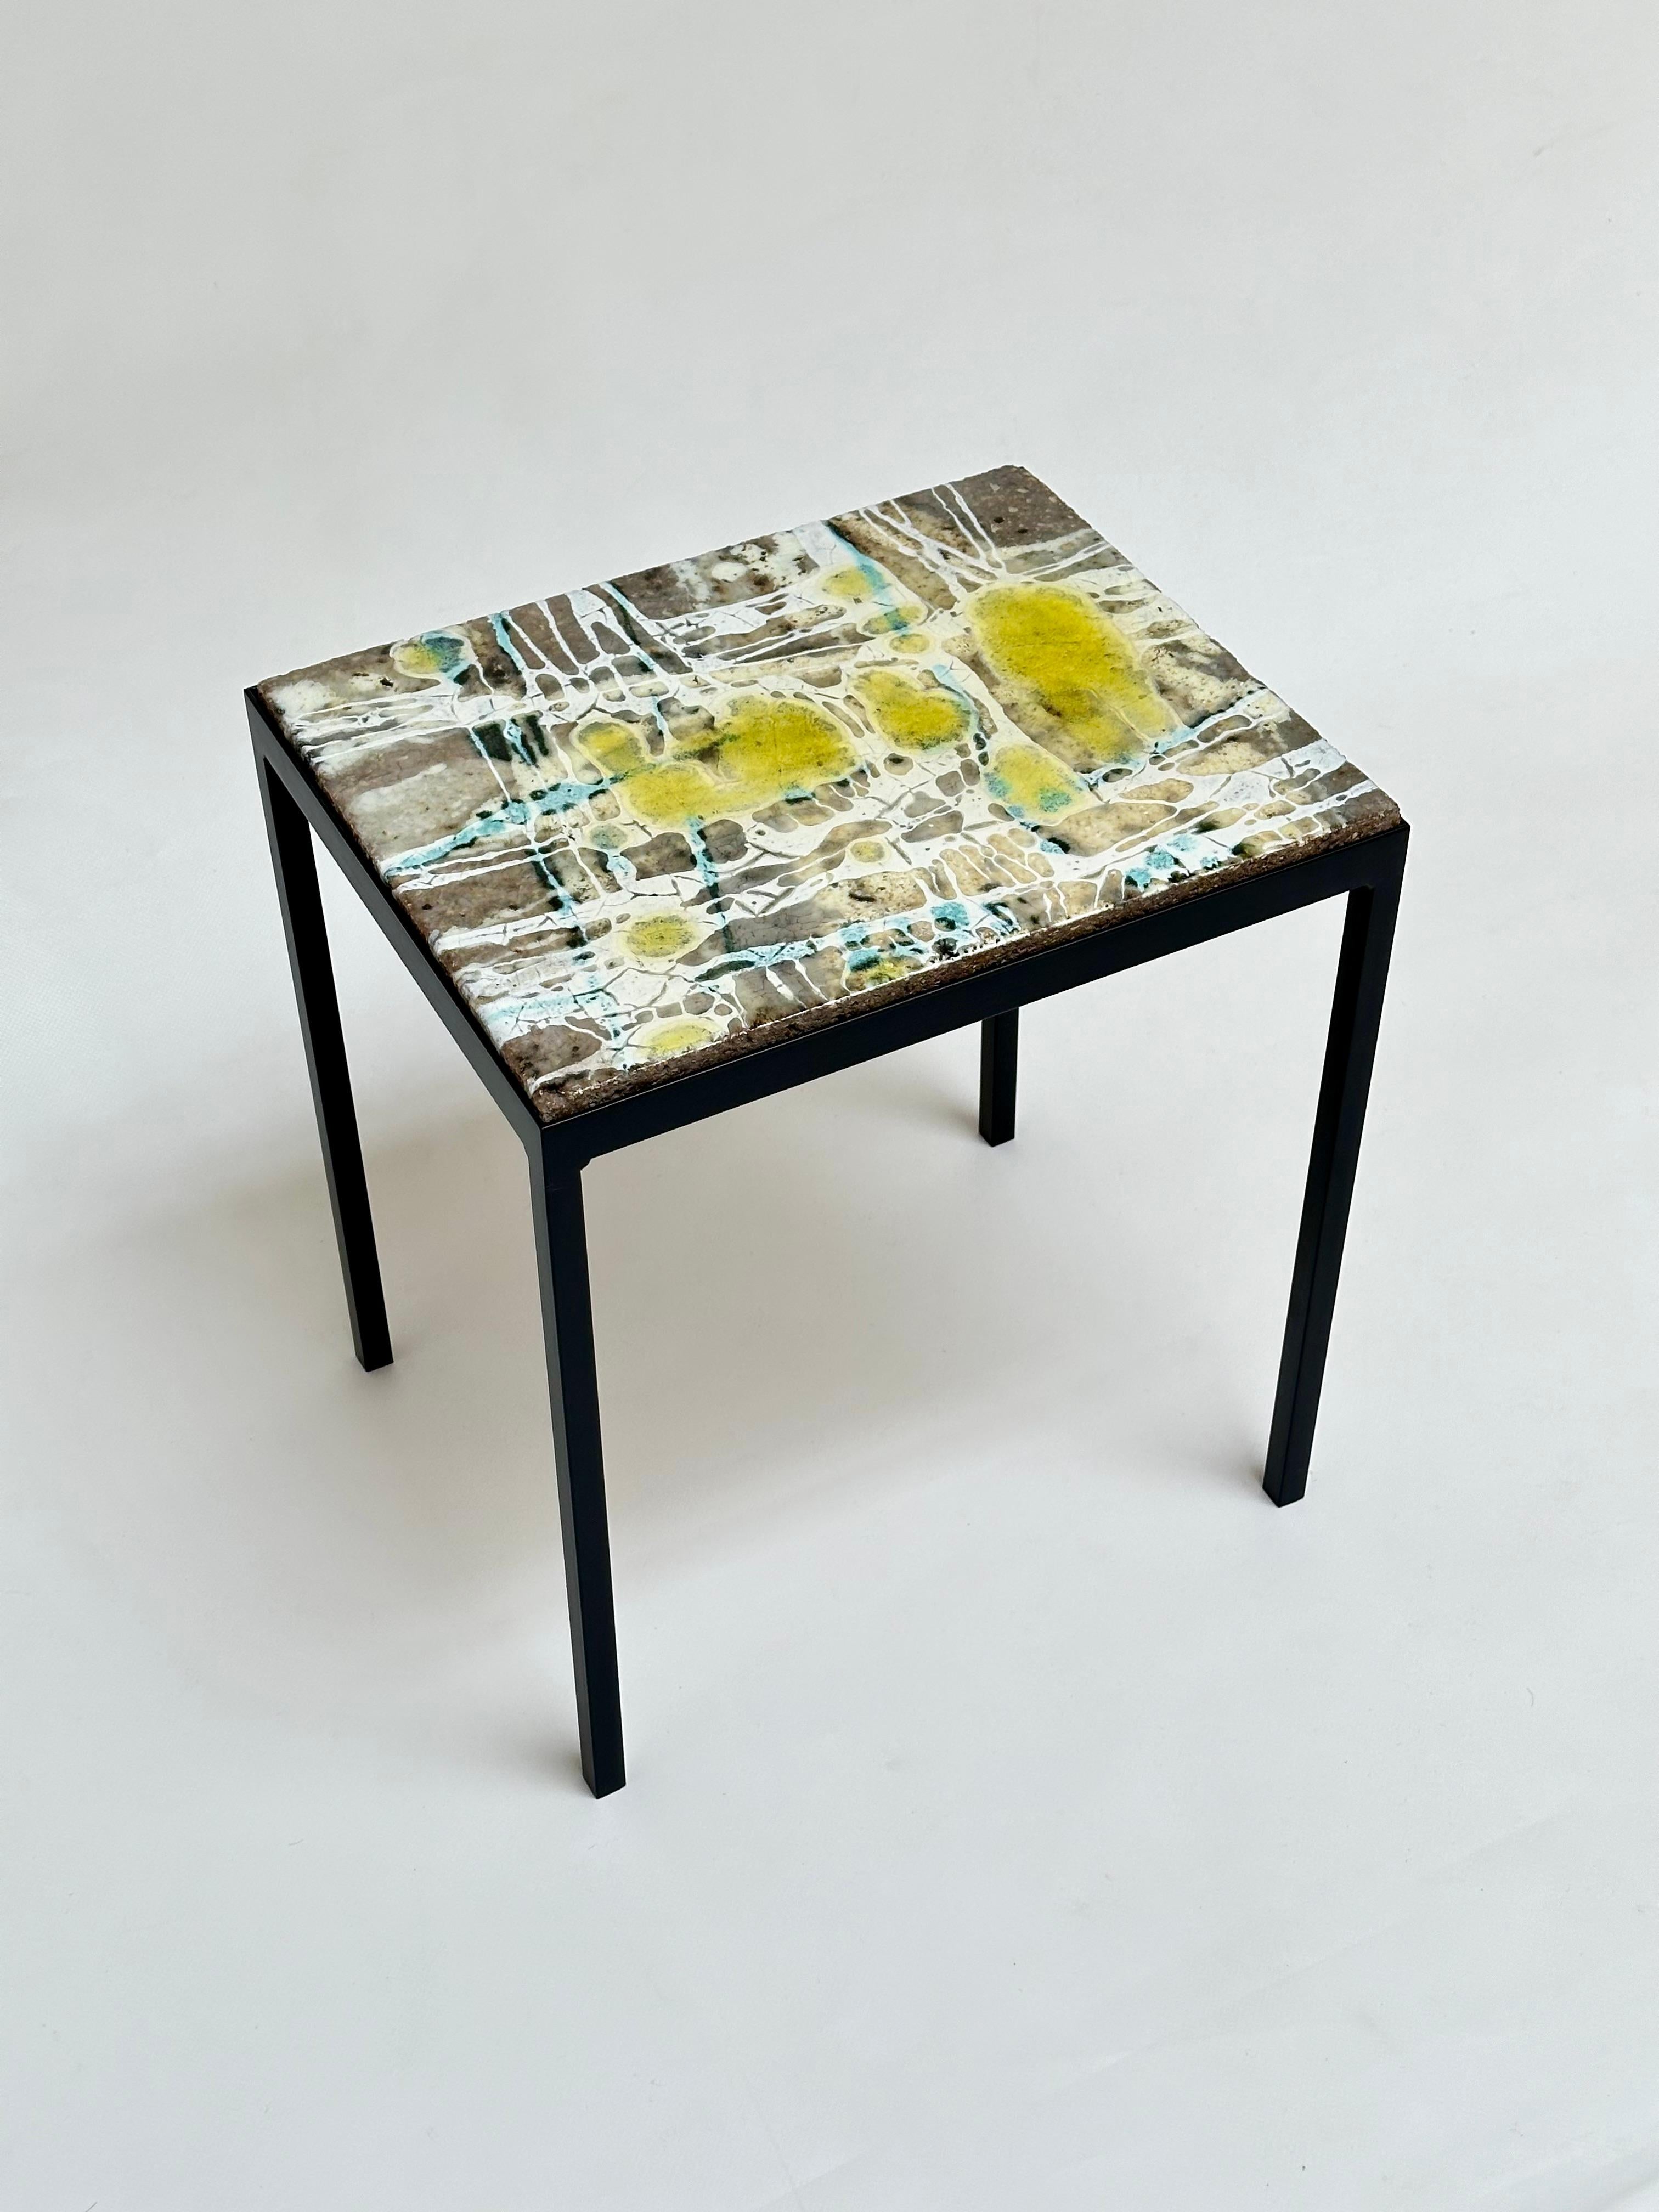 Decorative Low Table, Jo Amado, France 1962 For Sale 2